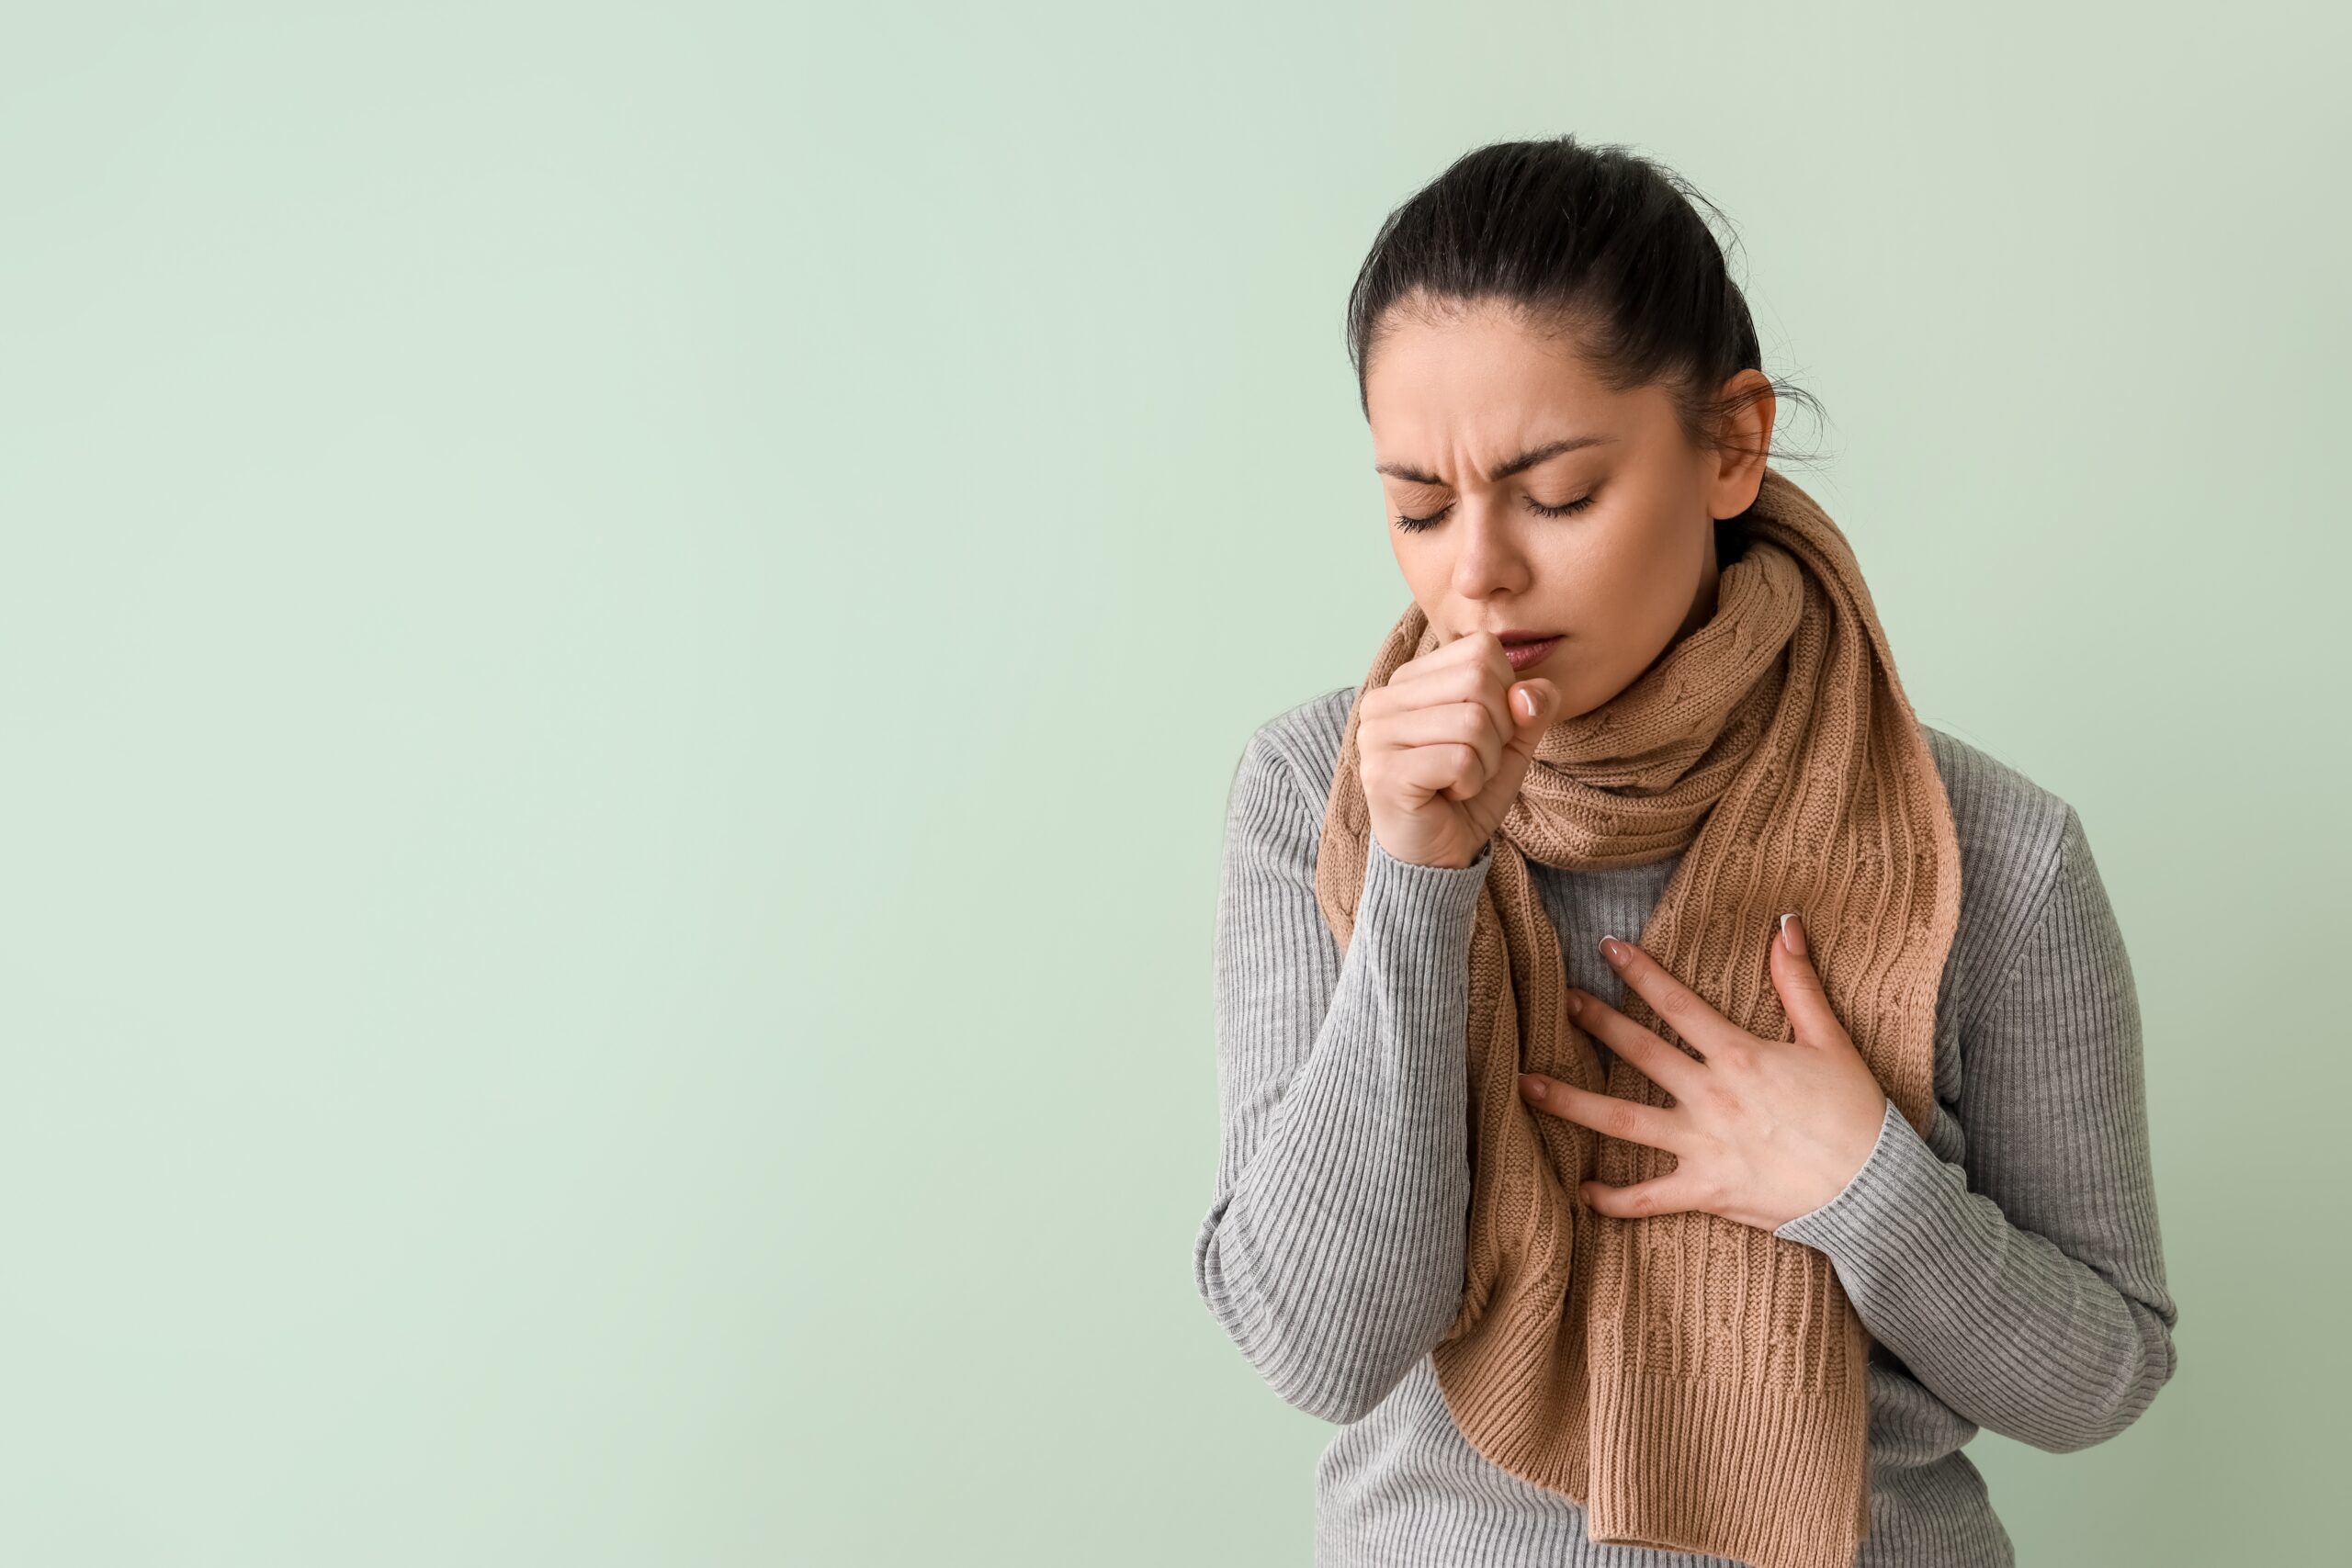 Cough: What Is, Types, Causes, Diagnosis, Treatment, and Prevention